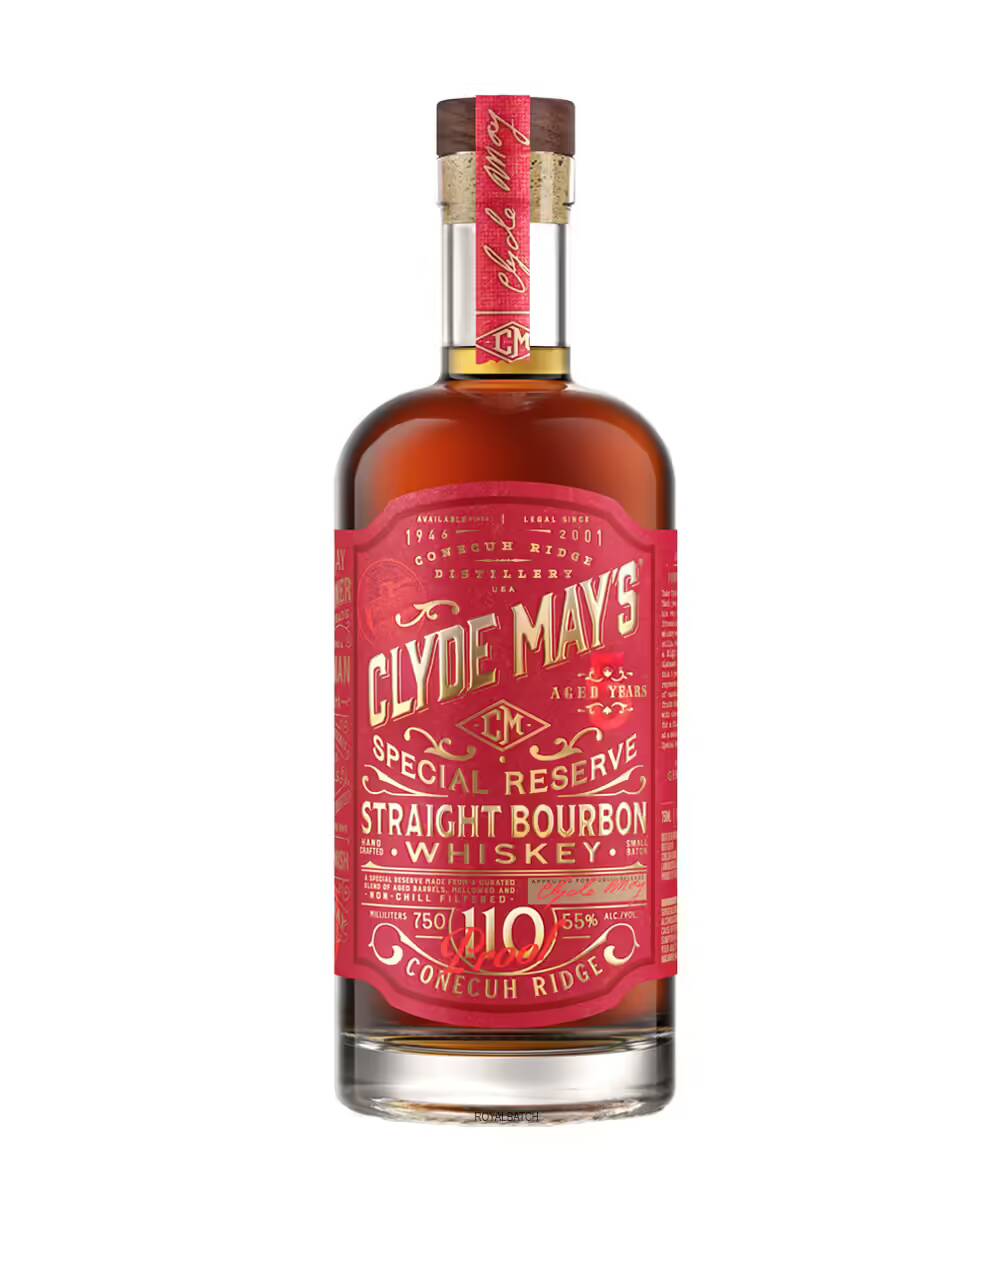 Clyde Mays Special Reserve 6 Year Old 110 Proof Straight Bourbon Whiskey